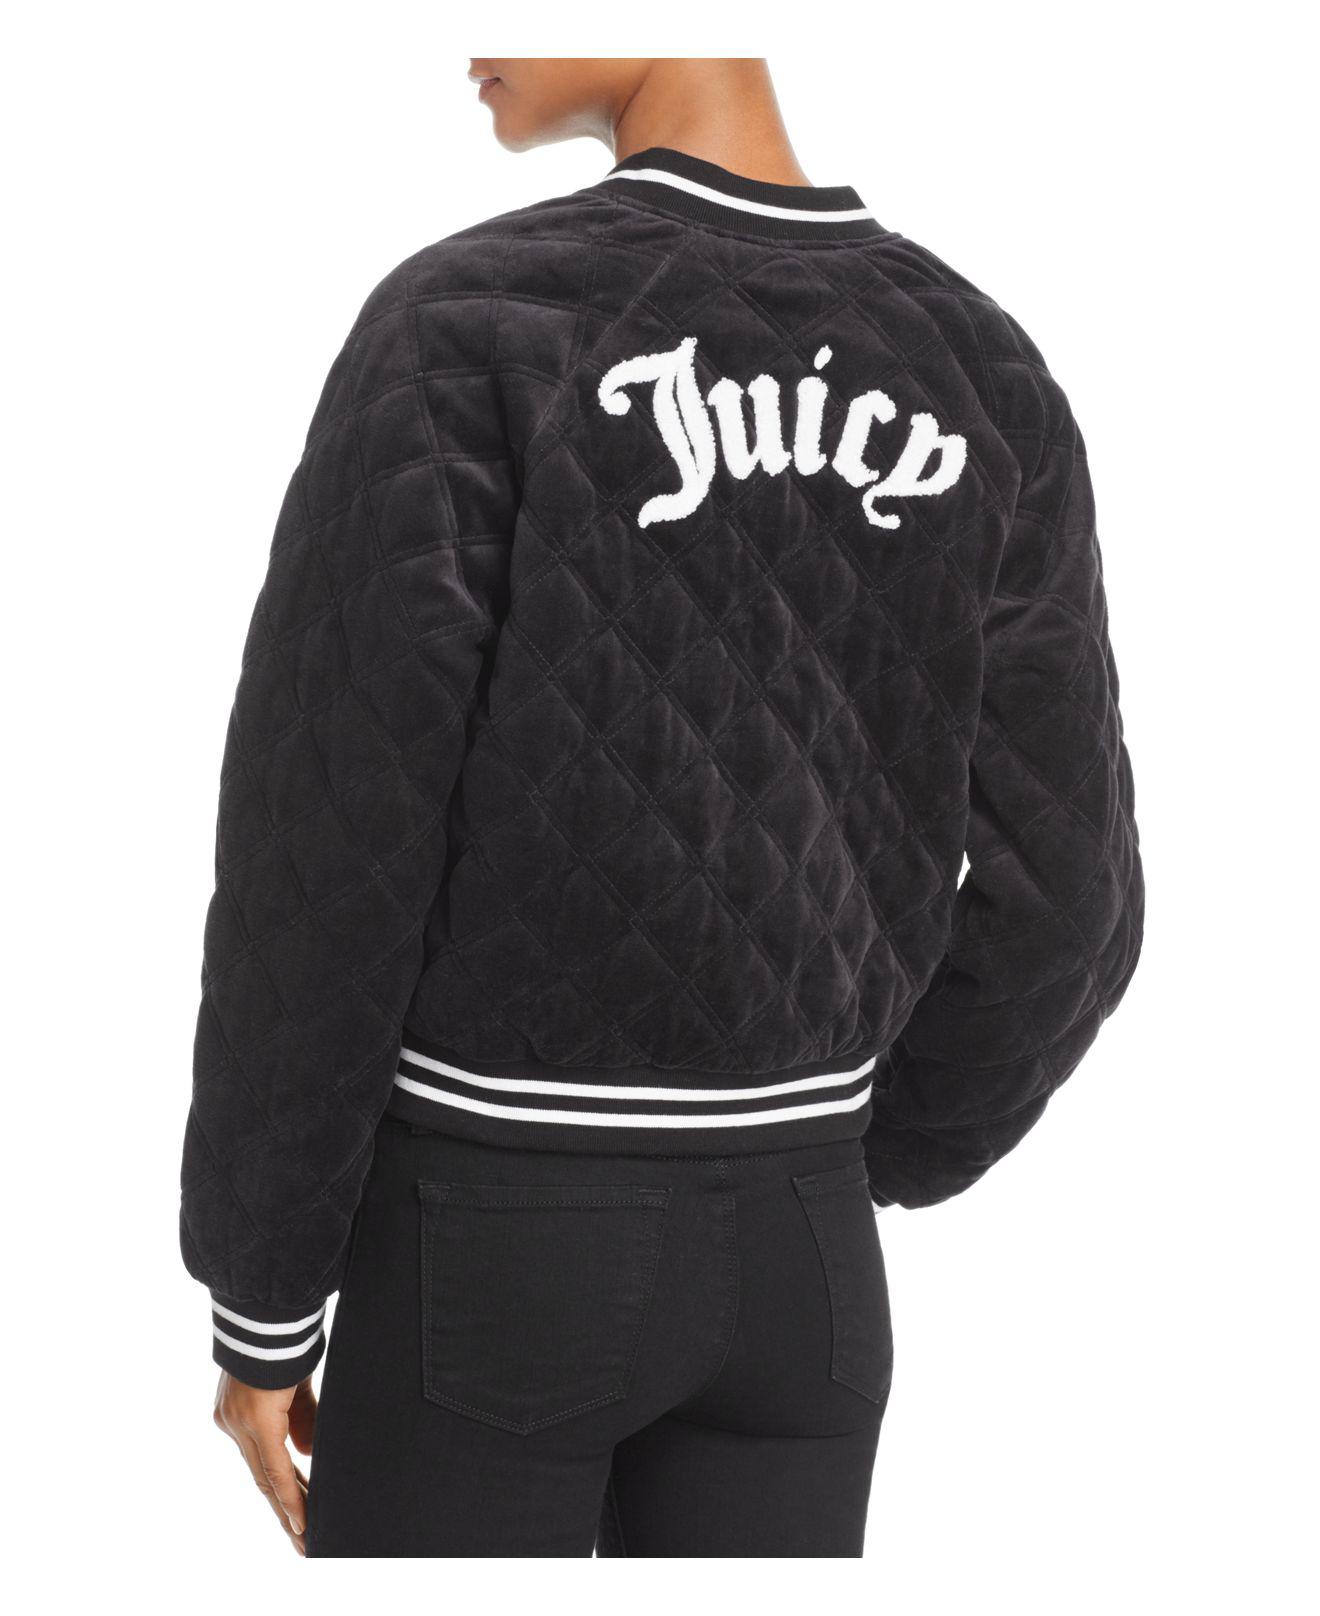 Juicy Couture Quilted Velour Bomber Jacket in Black - Lyst